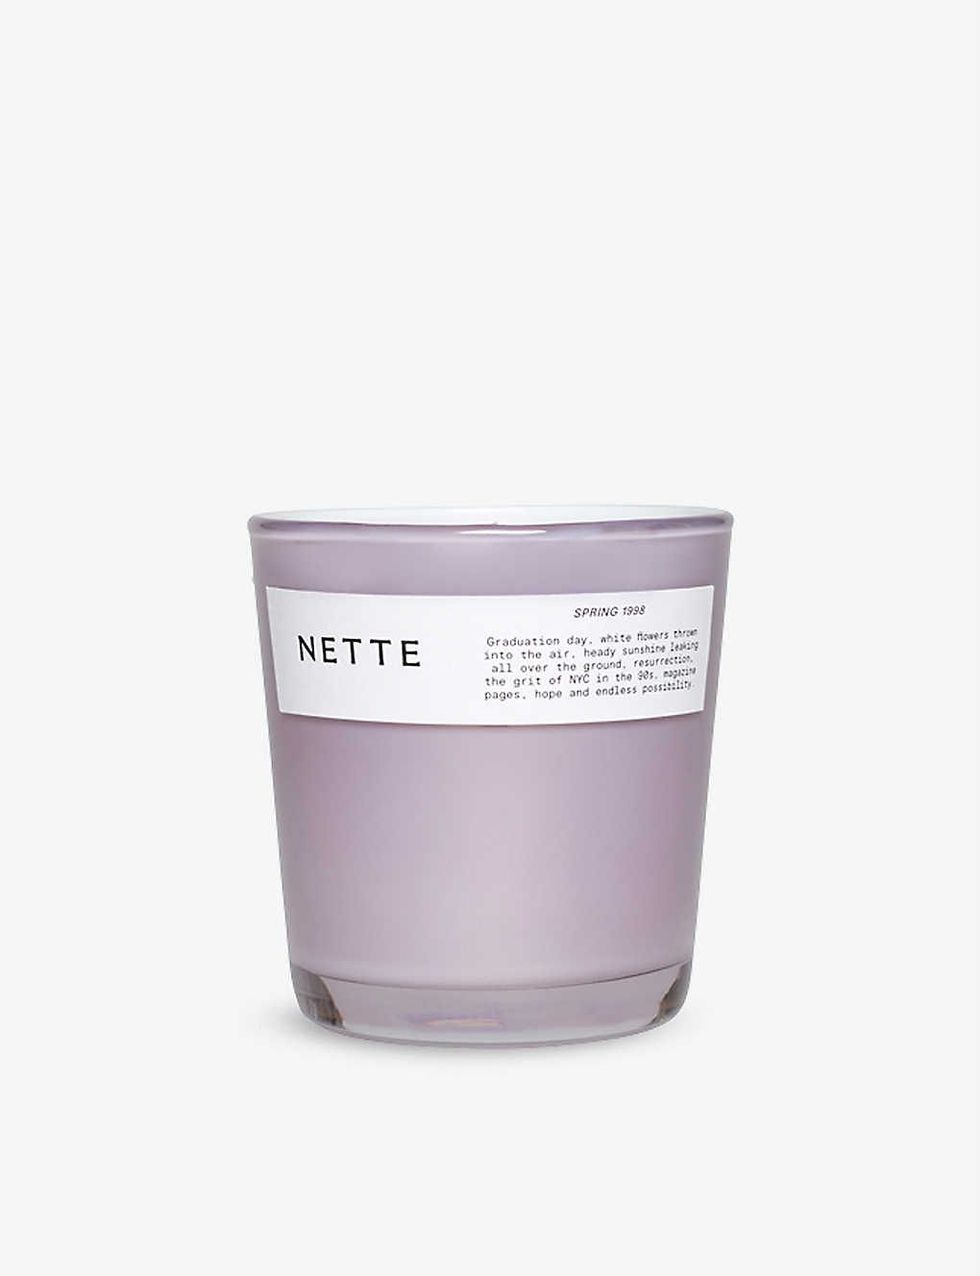 NETTE Spring 1998 scented candle 20.6oz